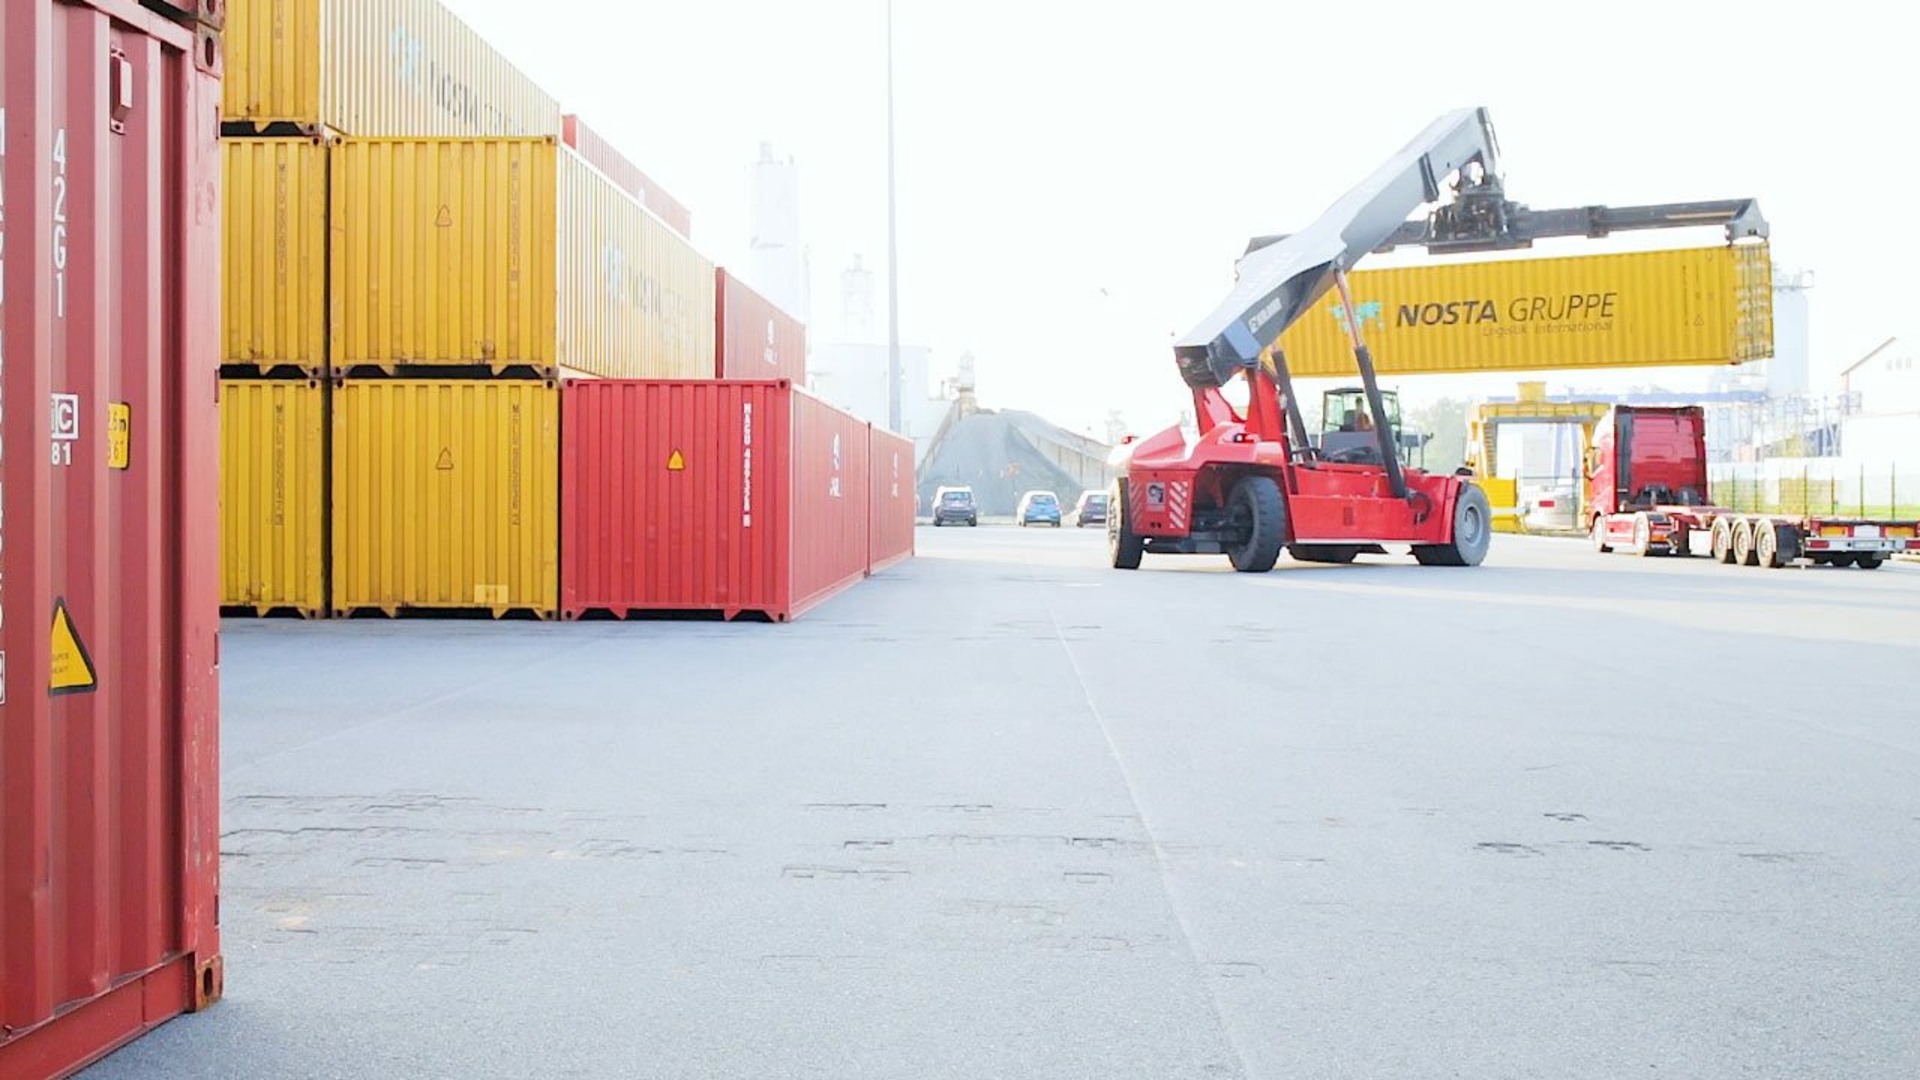 Image of container handling